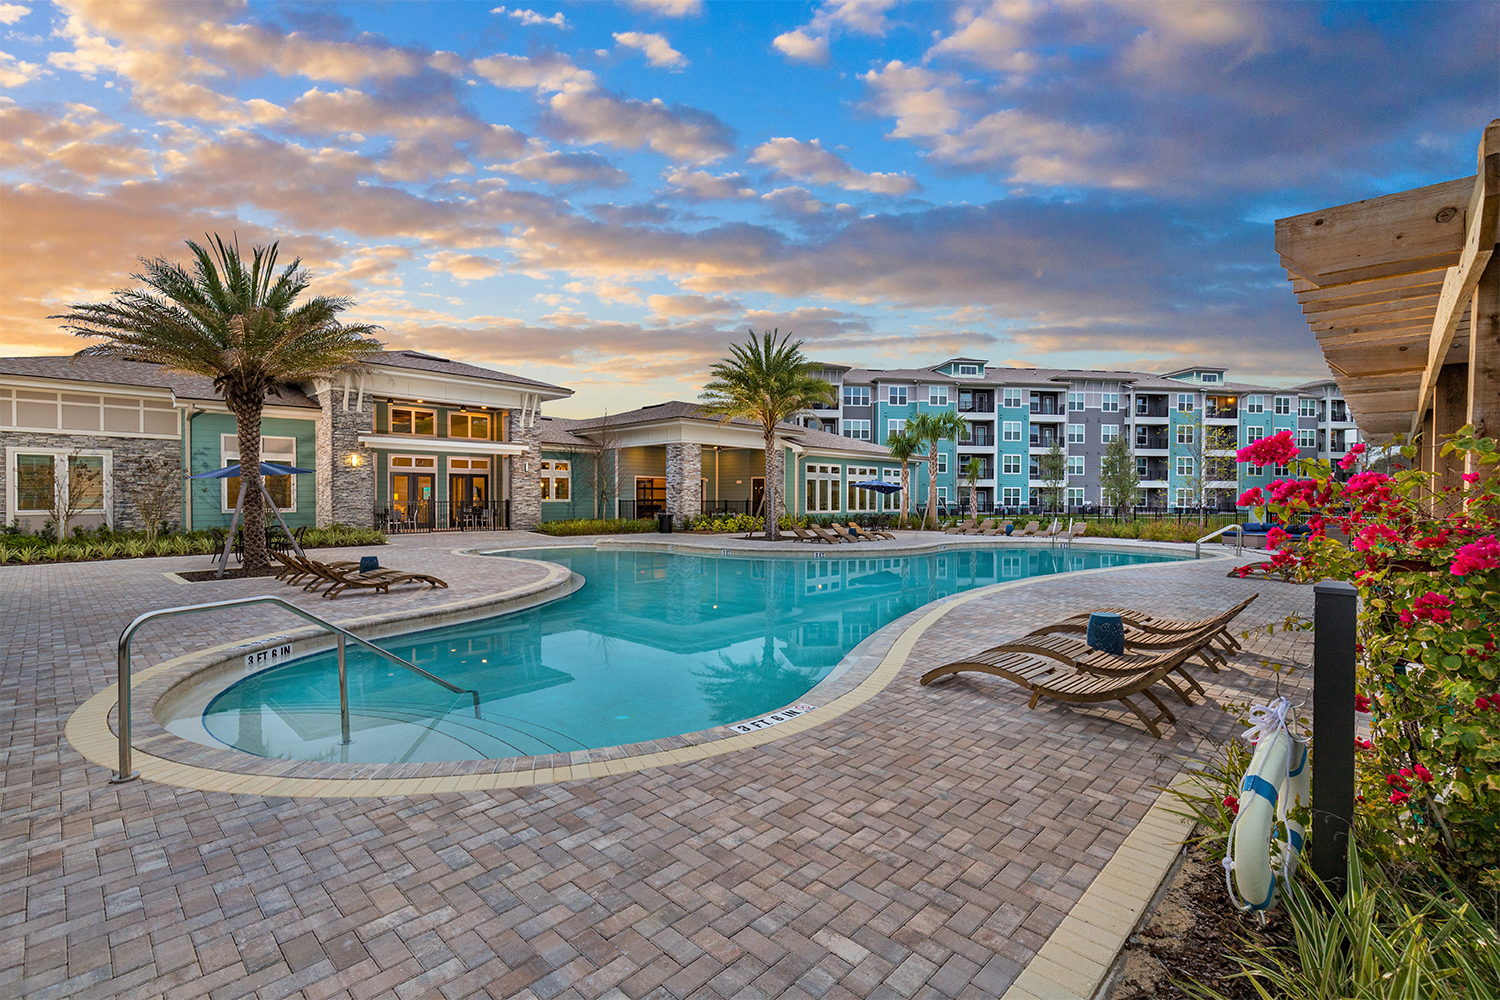 Balfour Beatty Communities Expands Multifamily Portfolio with 352-Unit Property in Kissimmee